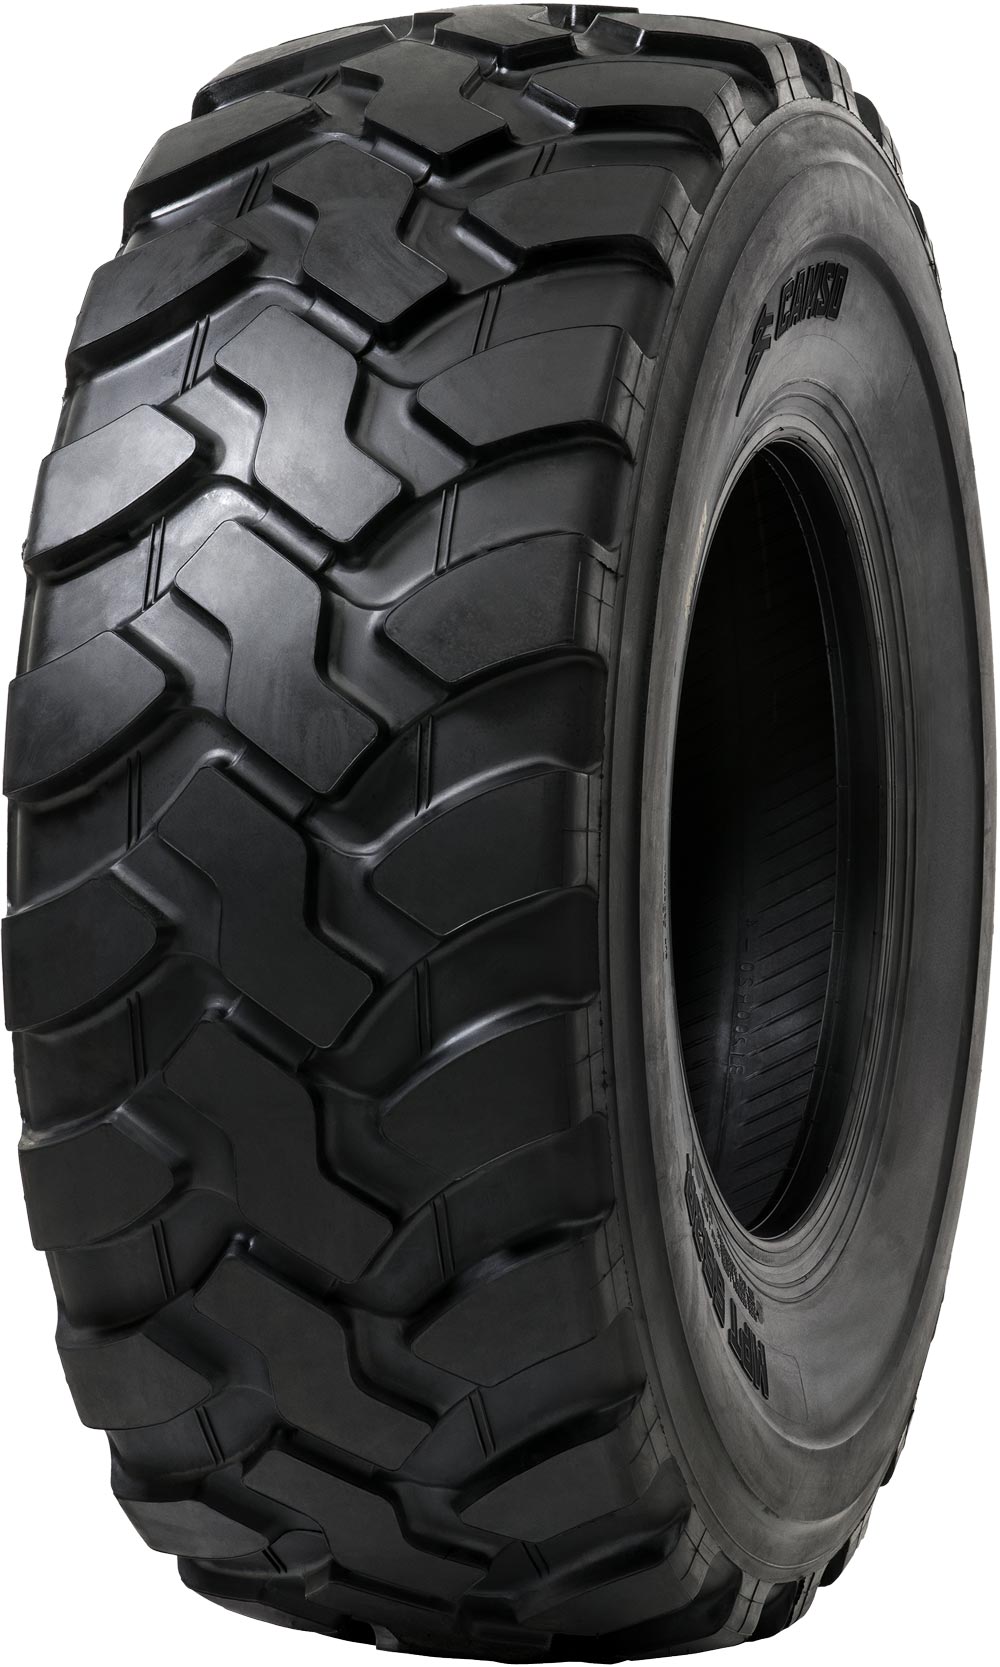 product_type-industrial_tires Camso MPT 553R TL 335/80 R20 147A